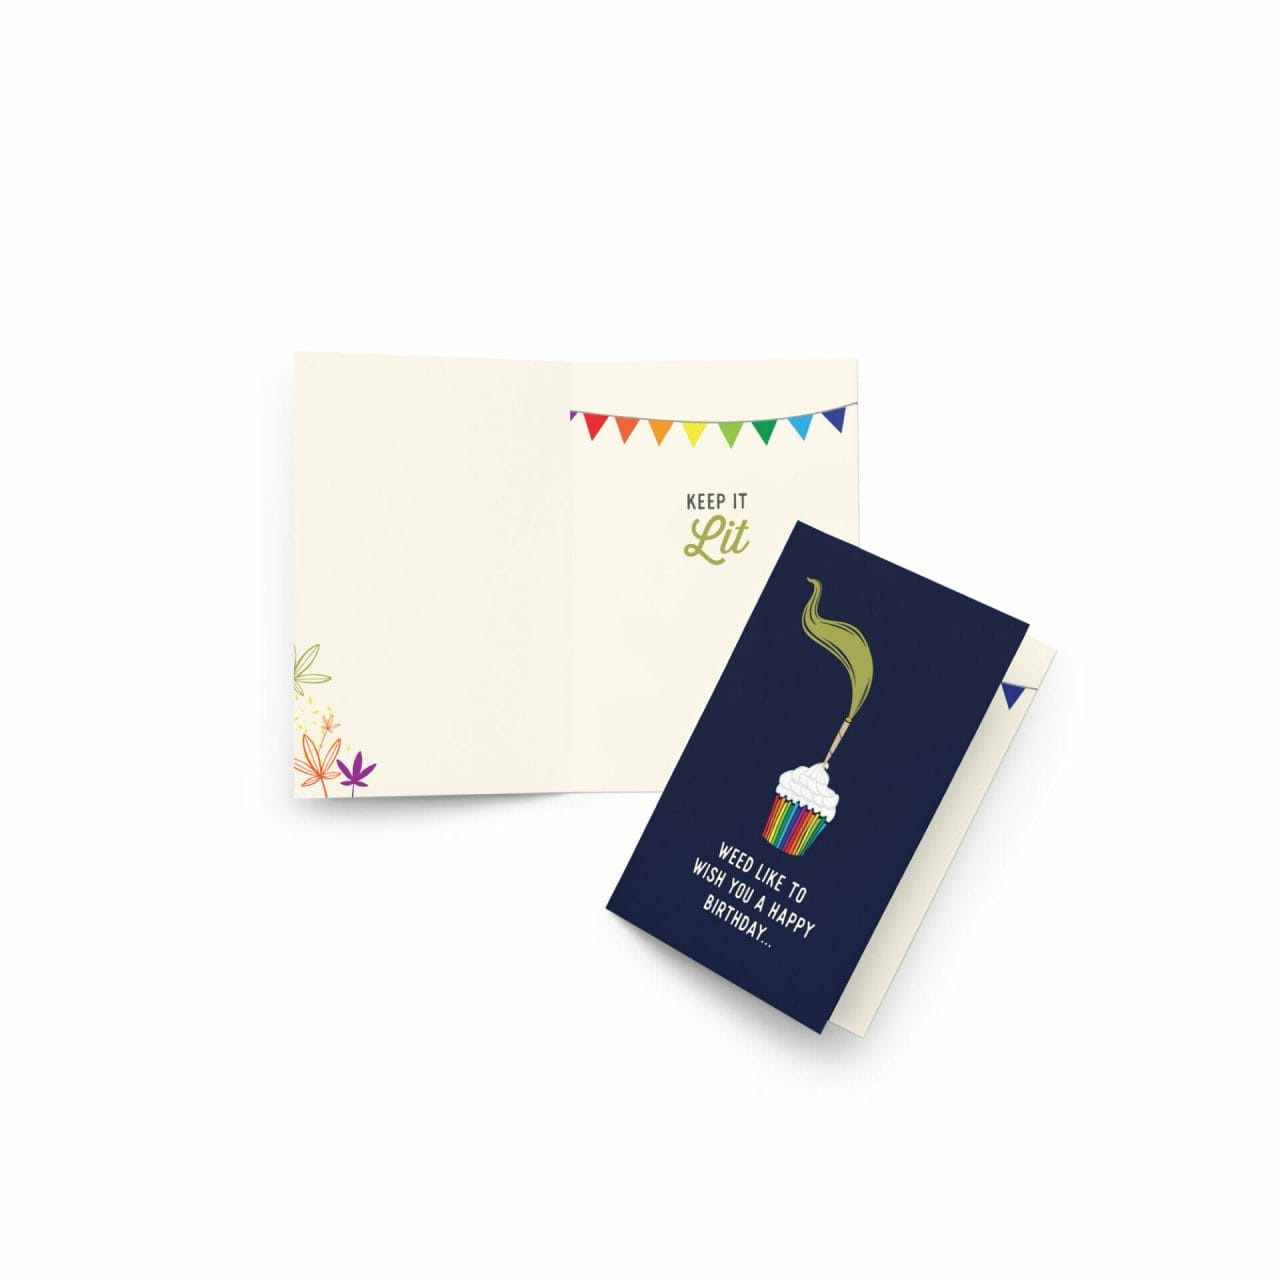 GHC "Weed Like To Wish You A Happy Birthday" Greeting card